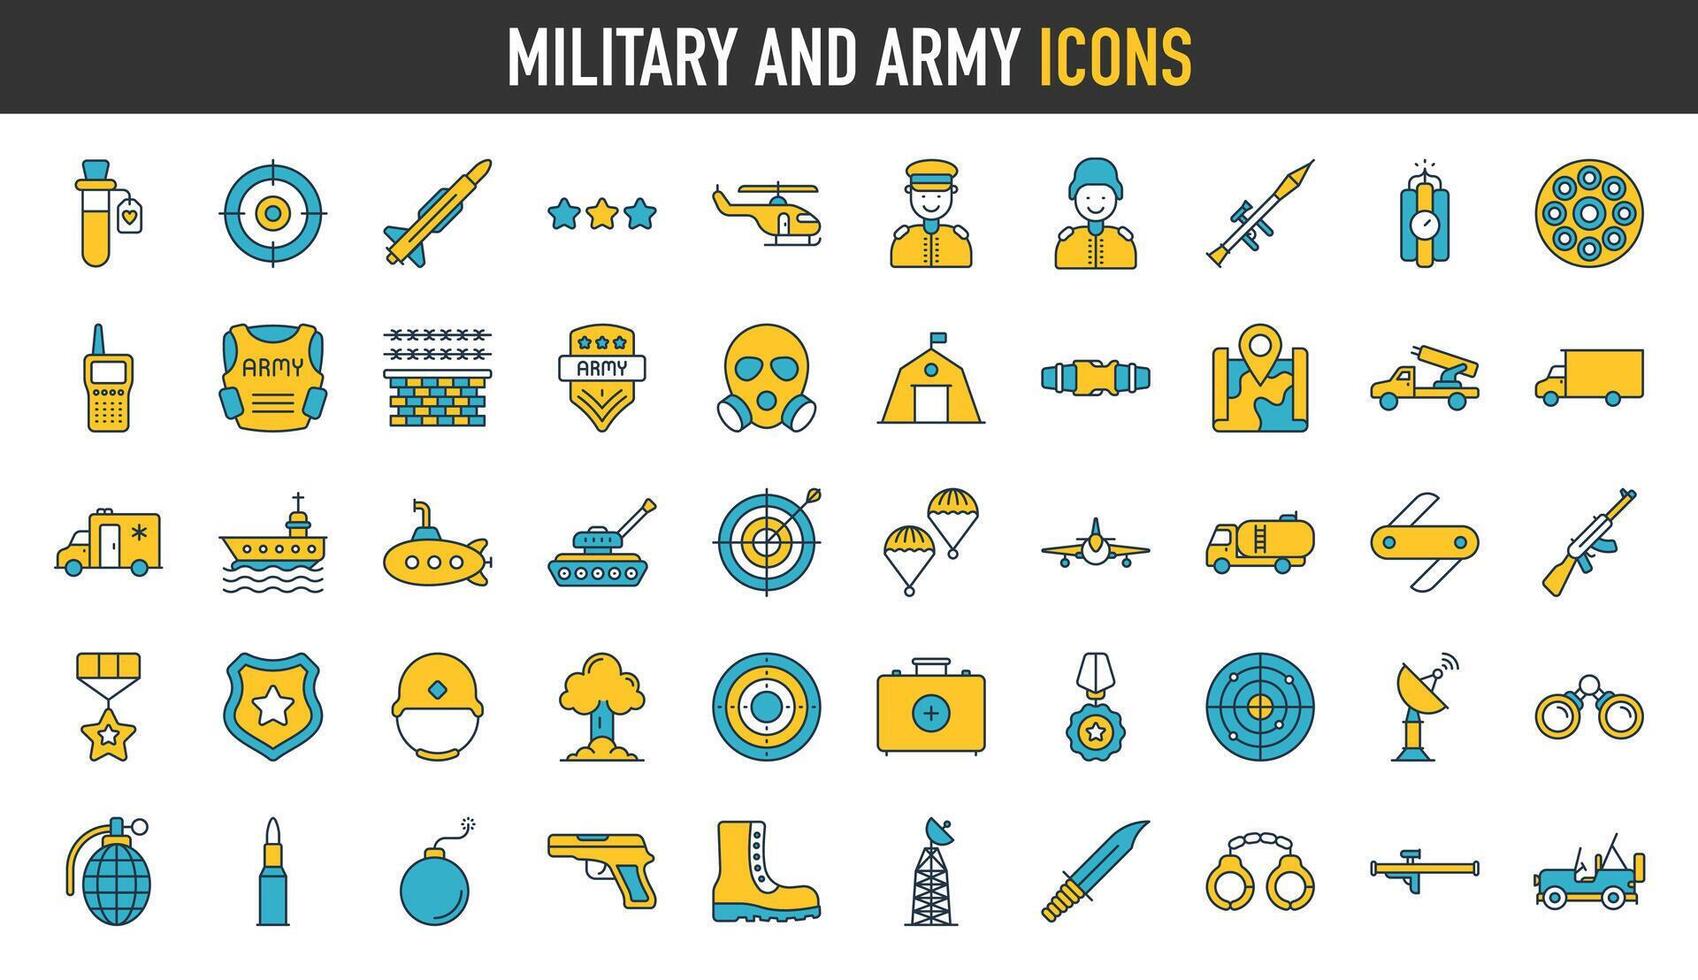 Military and army icons. Military Equipment, tools, aids and appliances, fighter plane, chevrons, terracotta. vector illustration